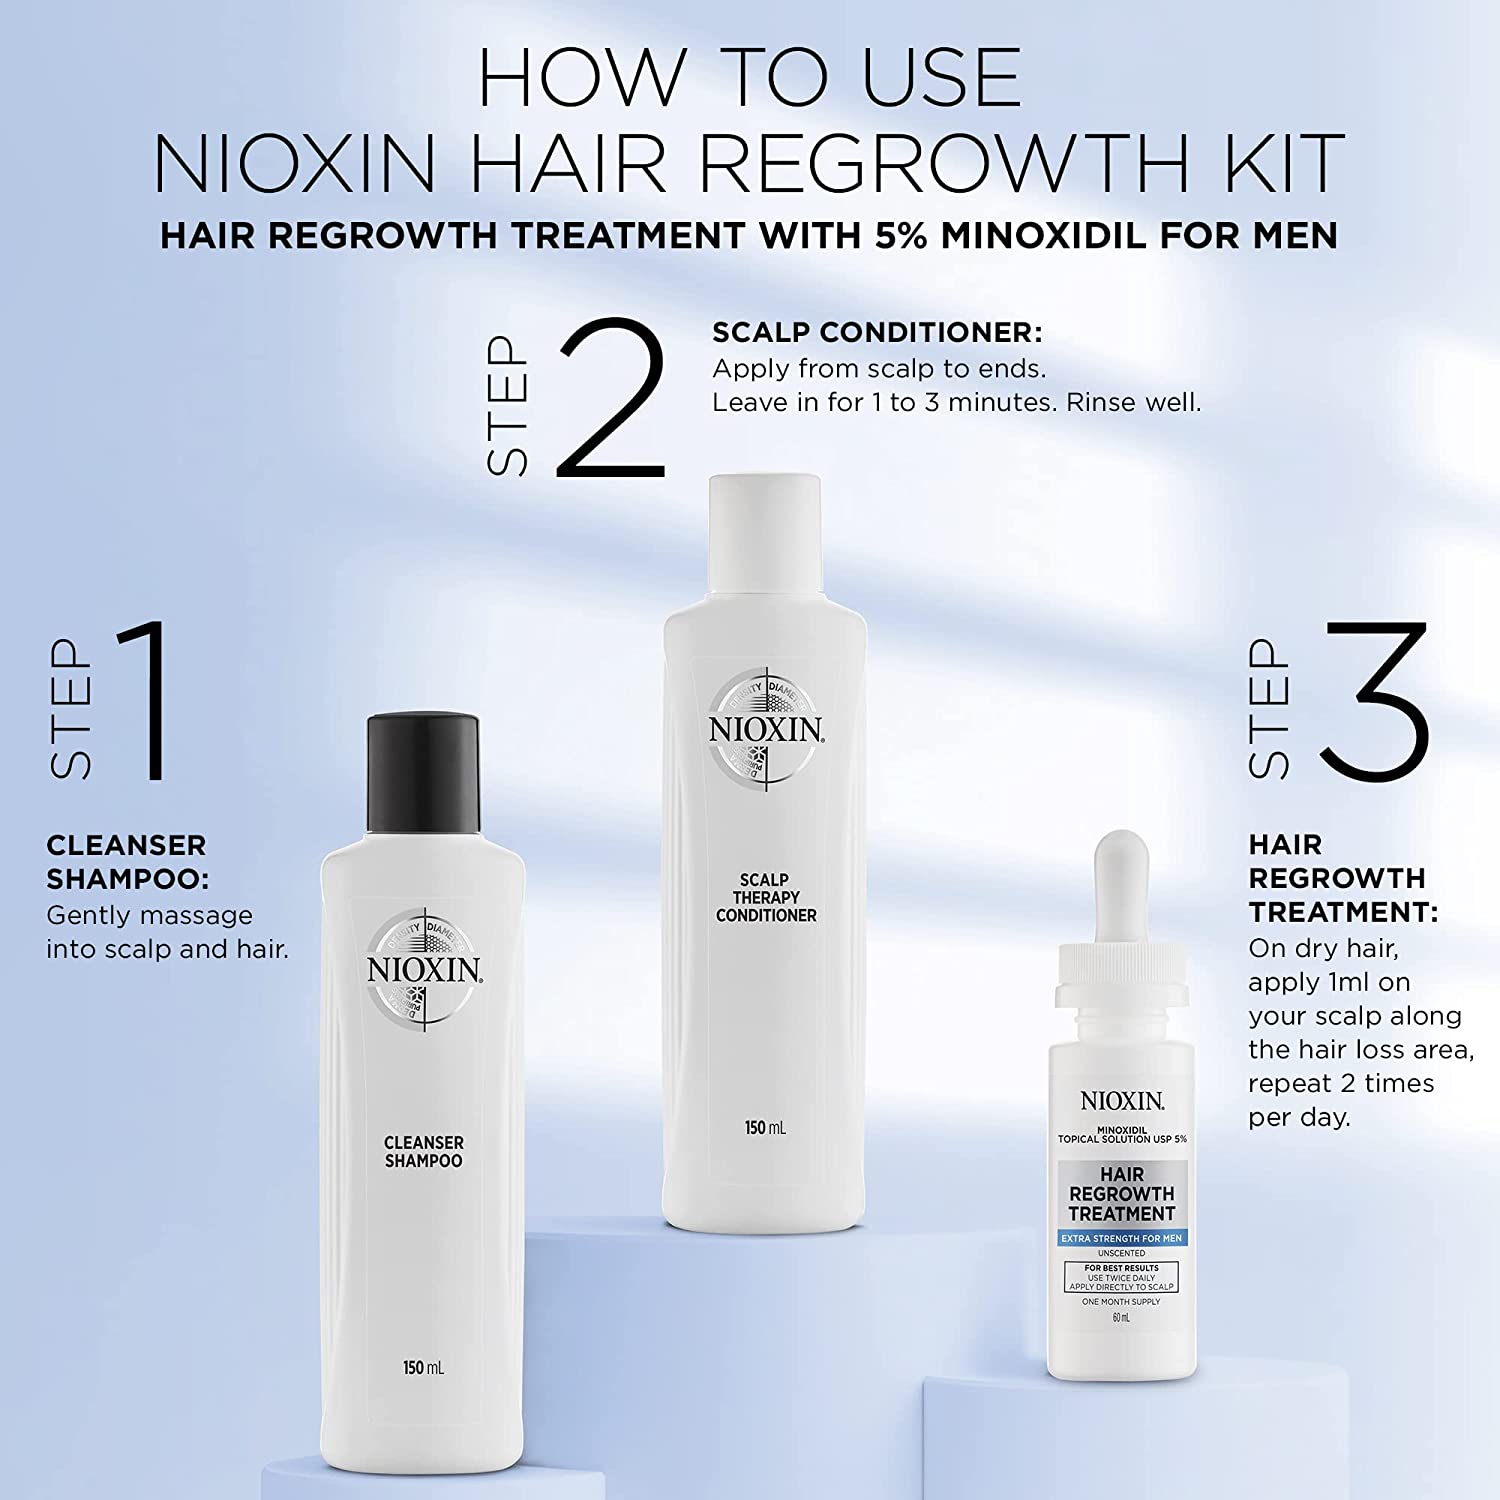 Nioxin Hair Regrowth Kit How to use